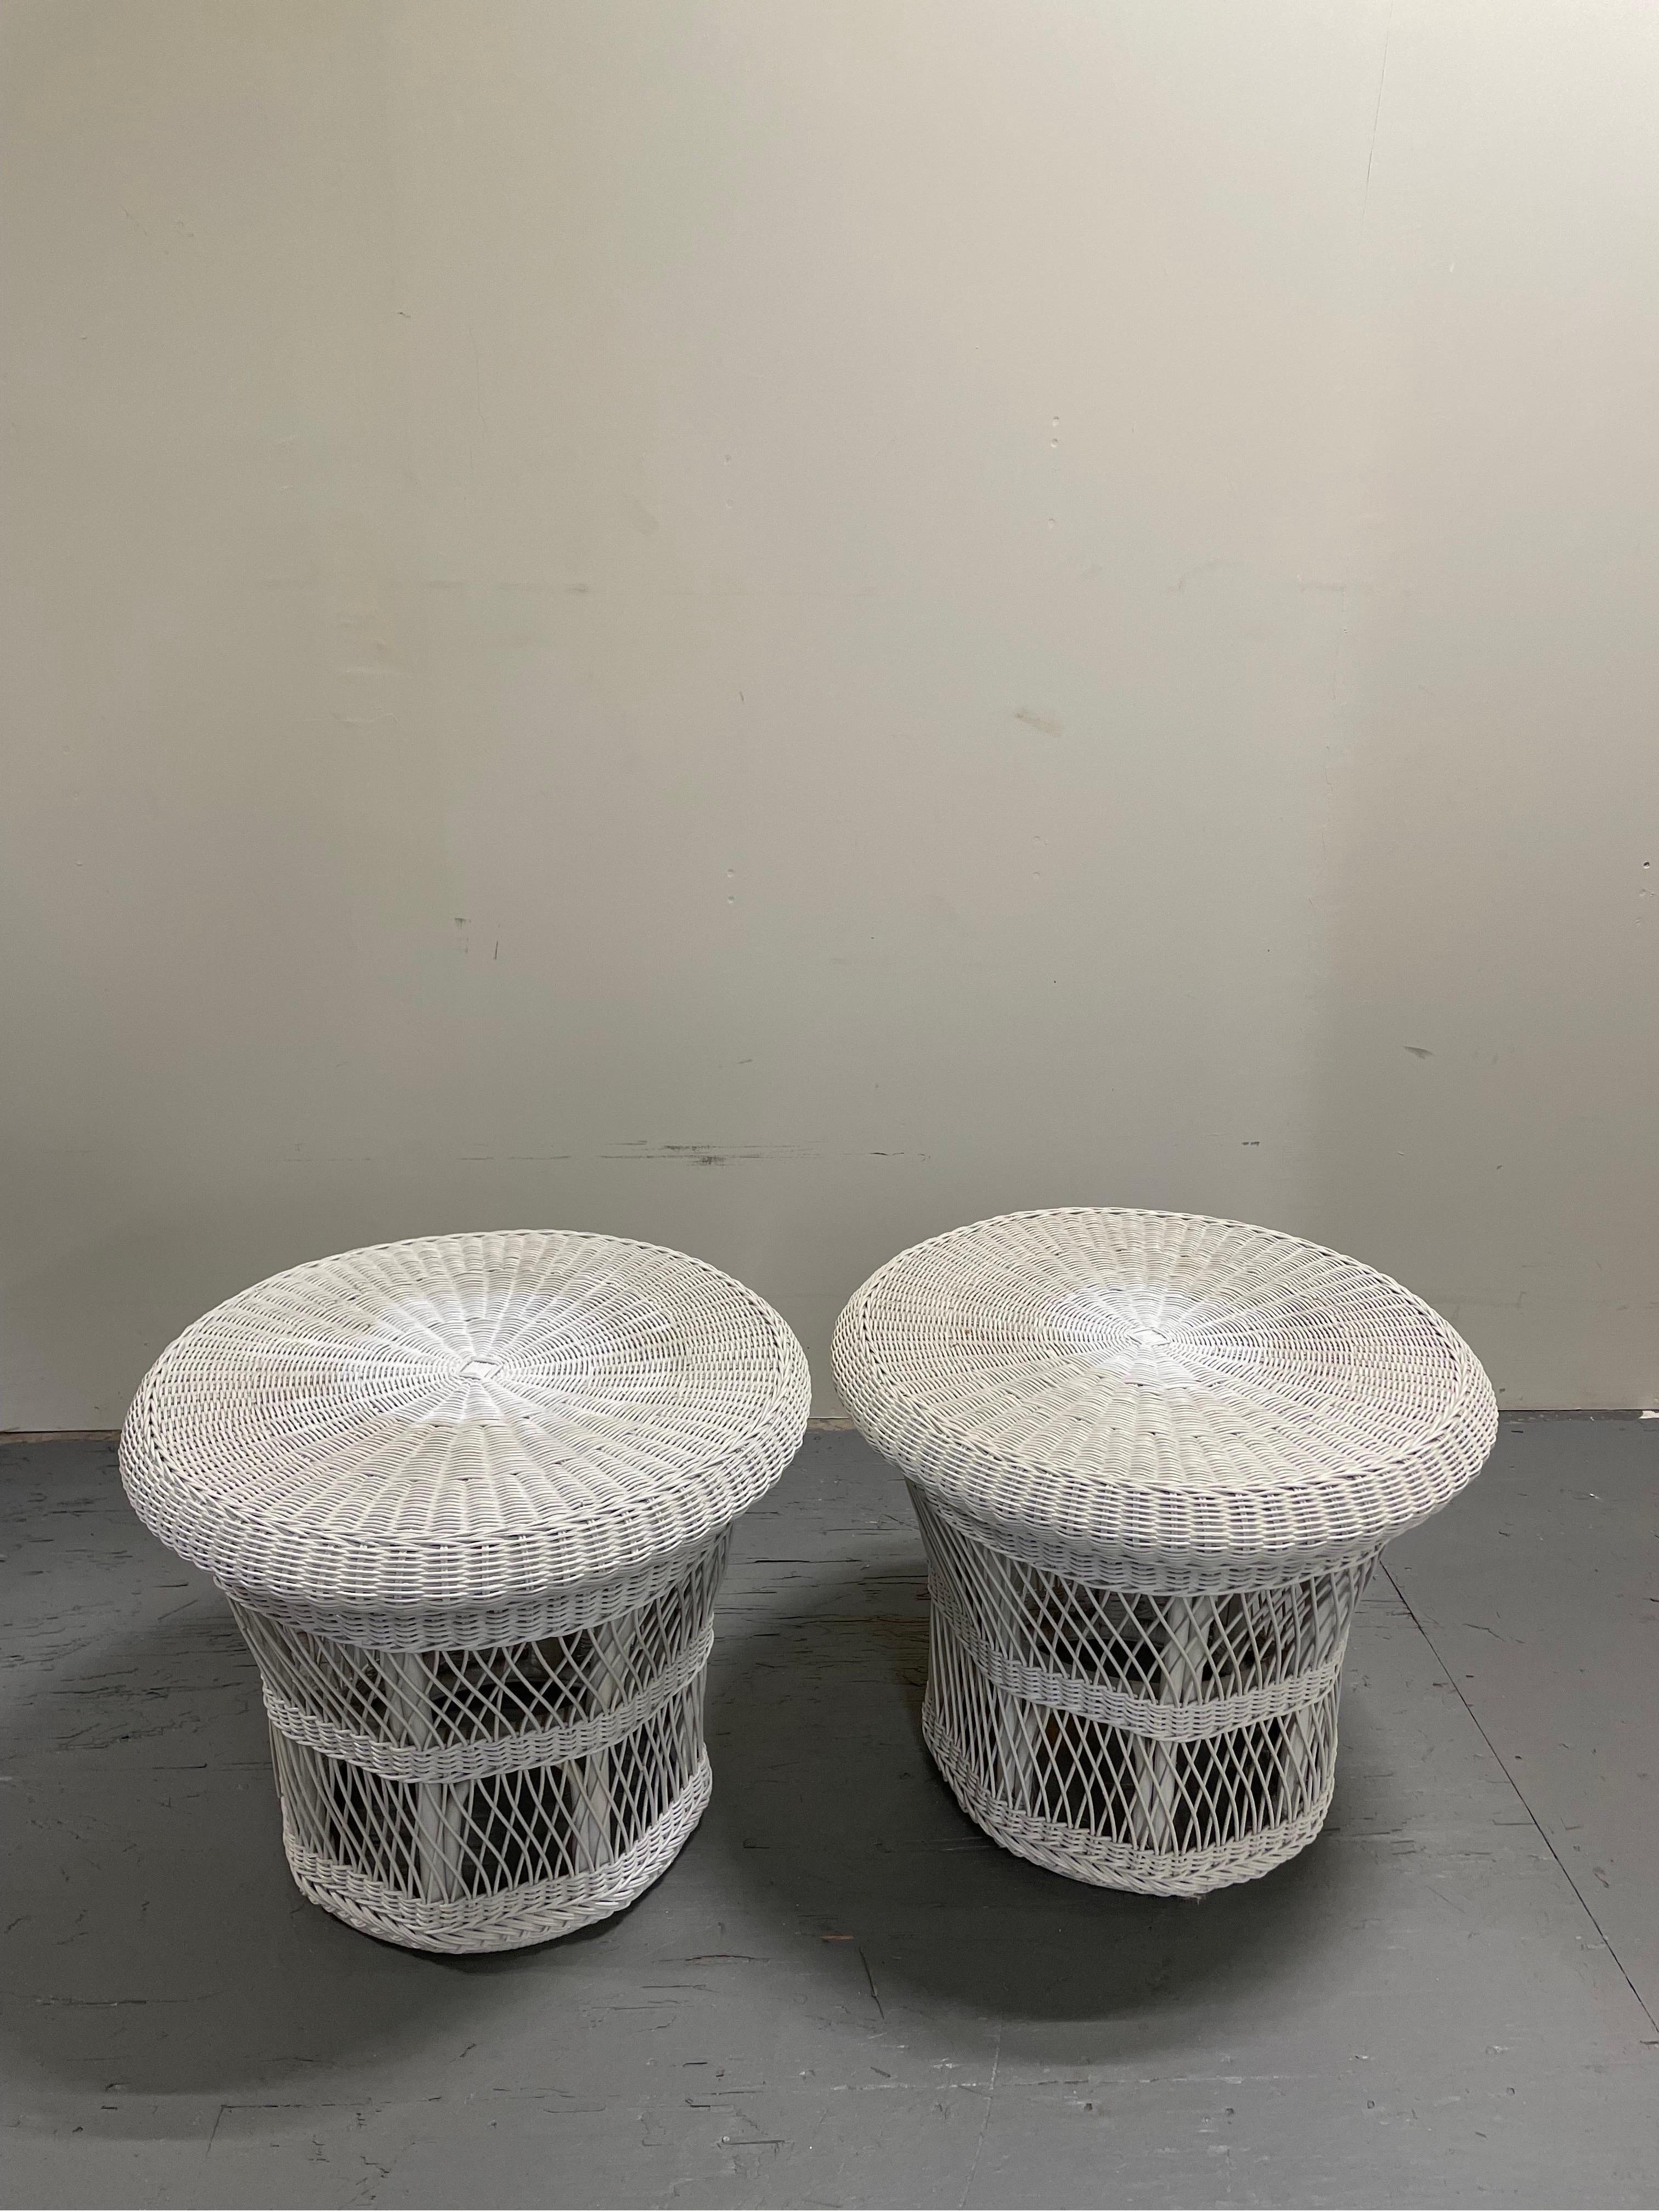 Vintage wicker side tables with removable tray top. Classic and timeless. Solid wicker construction with ample storage and versatility with removable tray top.
Curbside to NYC/Philly $300.